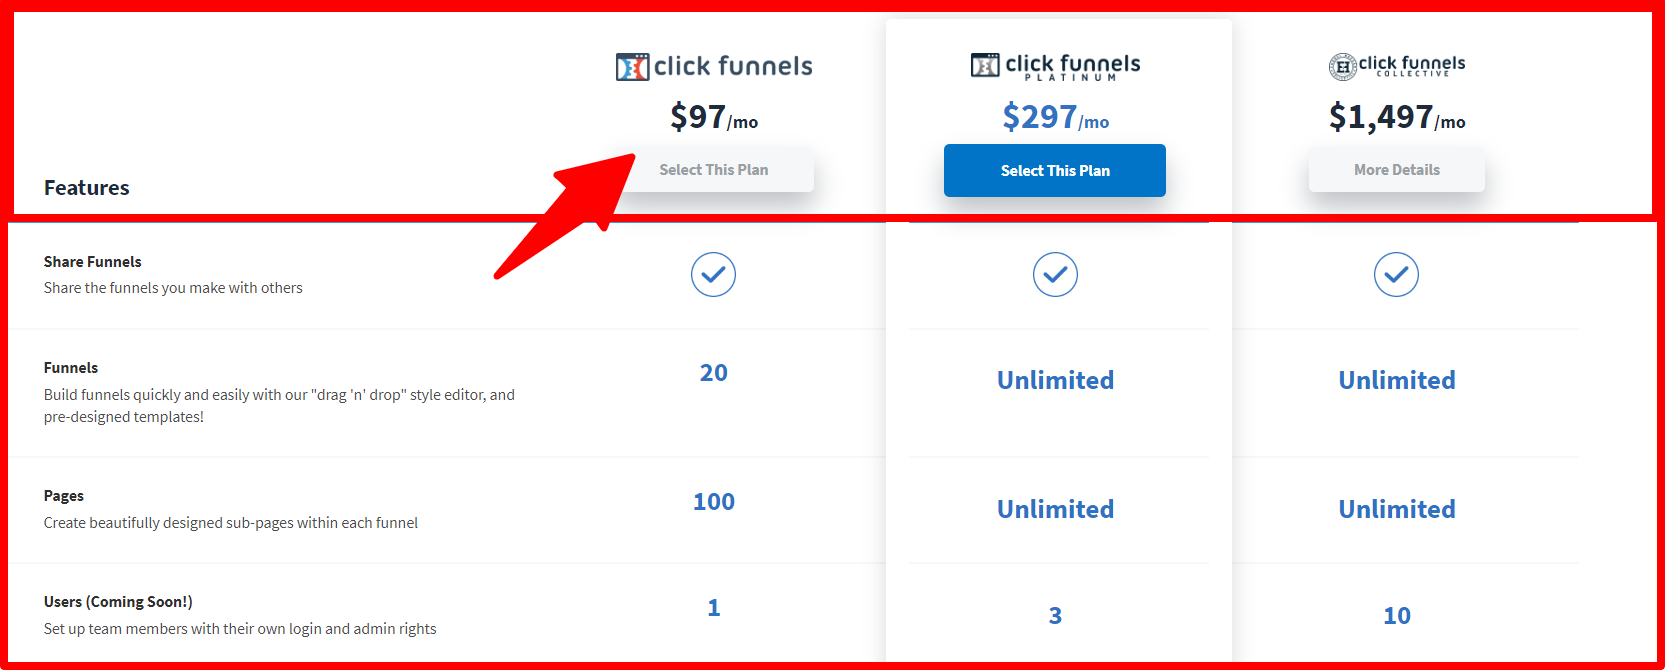  GroovePages vs ClickFunnels - ClickFunnels Pricing